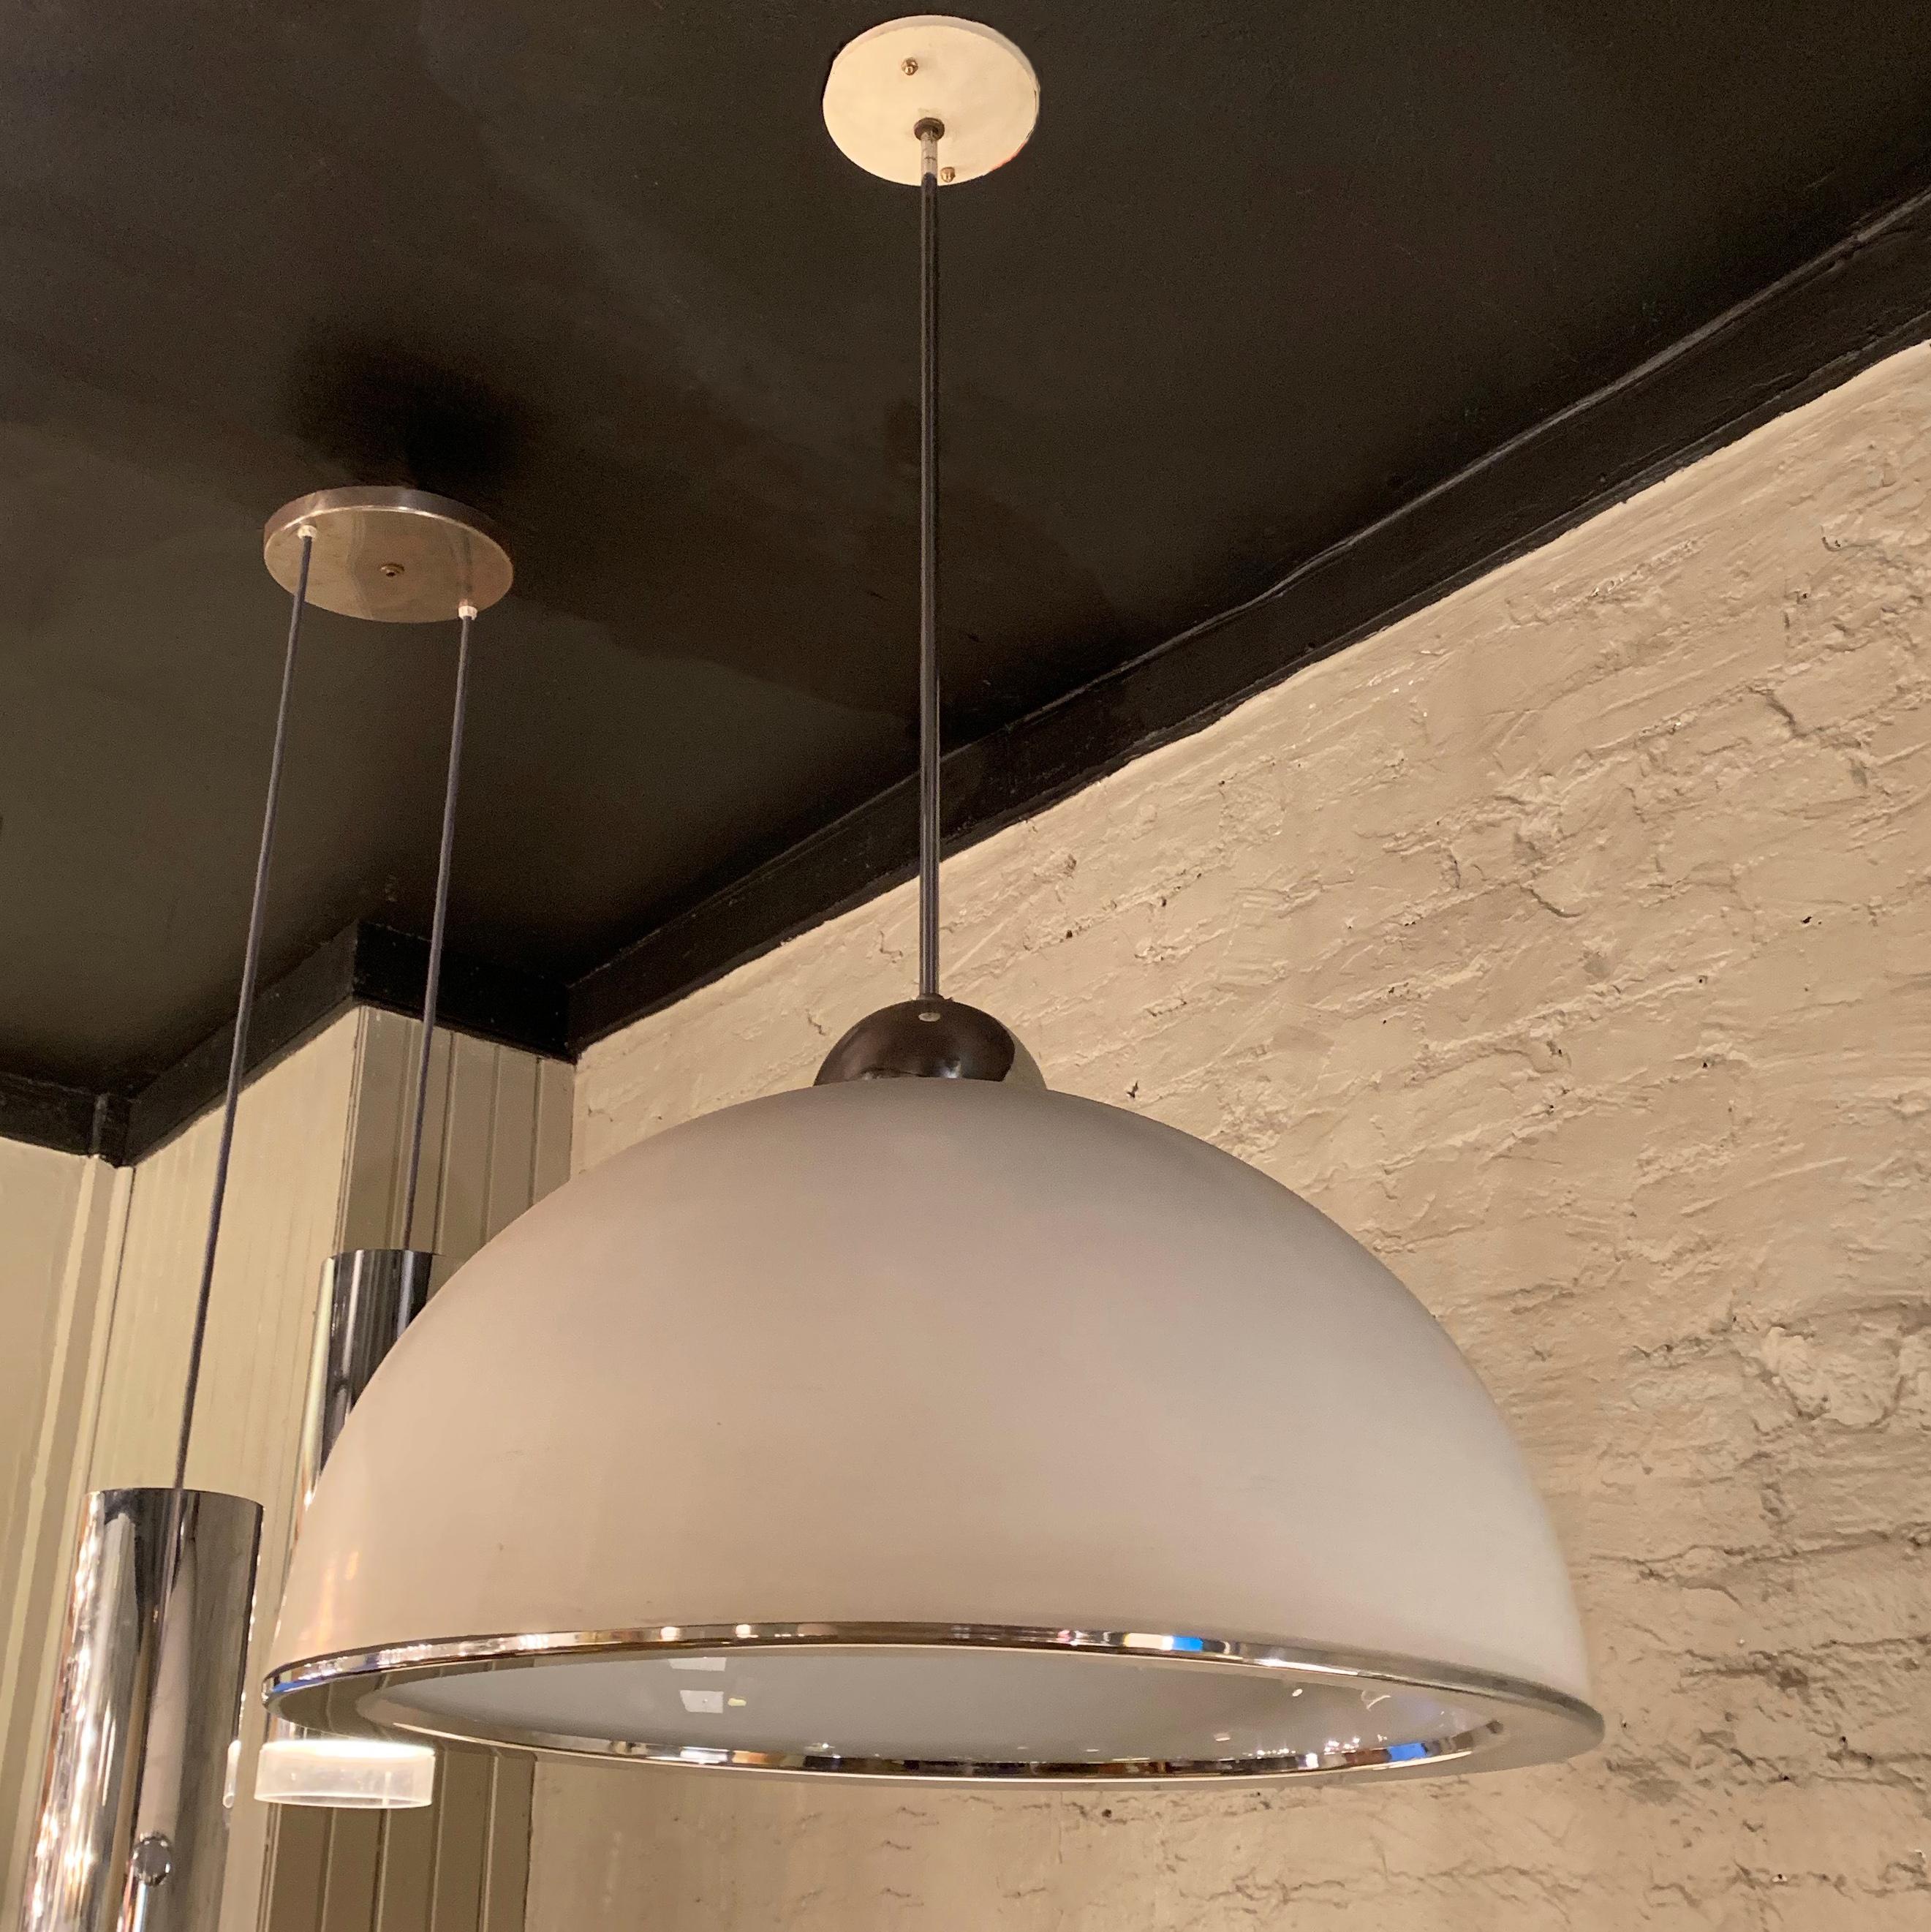 Mid-Century Modern, pendant light features a painted aluminum dome shade with chrome trim and stem with diffused milk glass interior. The pendant takes 2 bulbs up to 100 watts each. Overall height of the pendant is 36 inches.